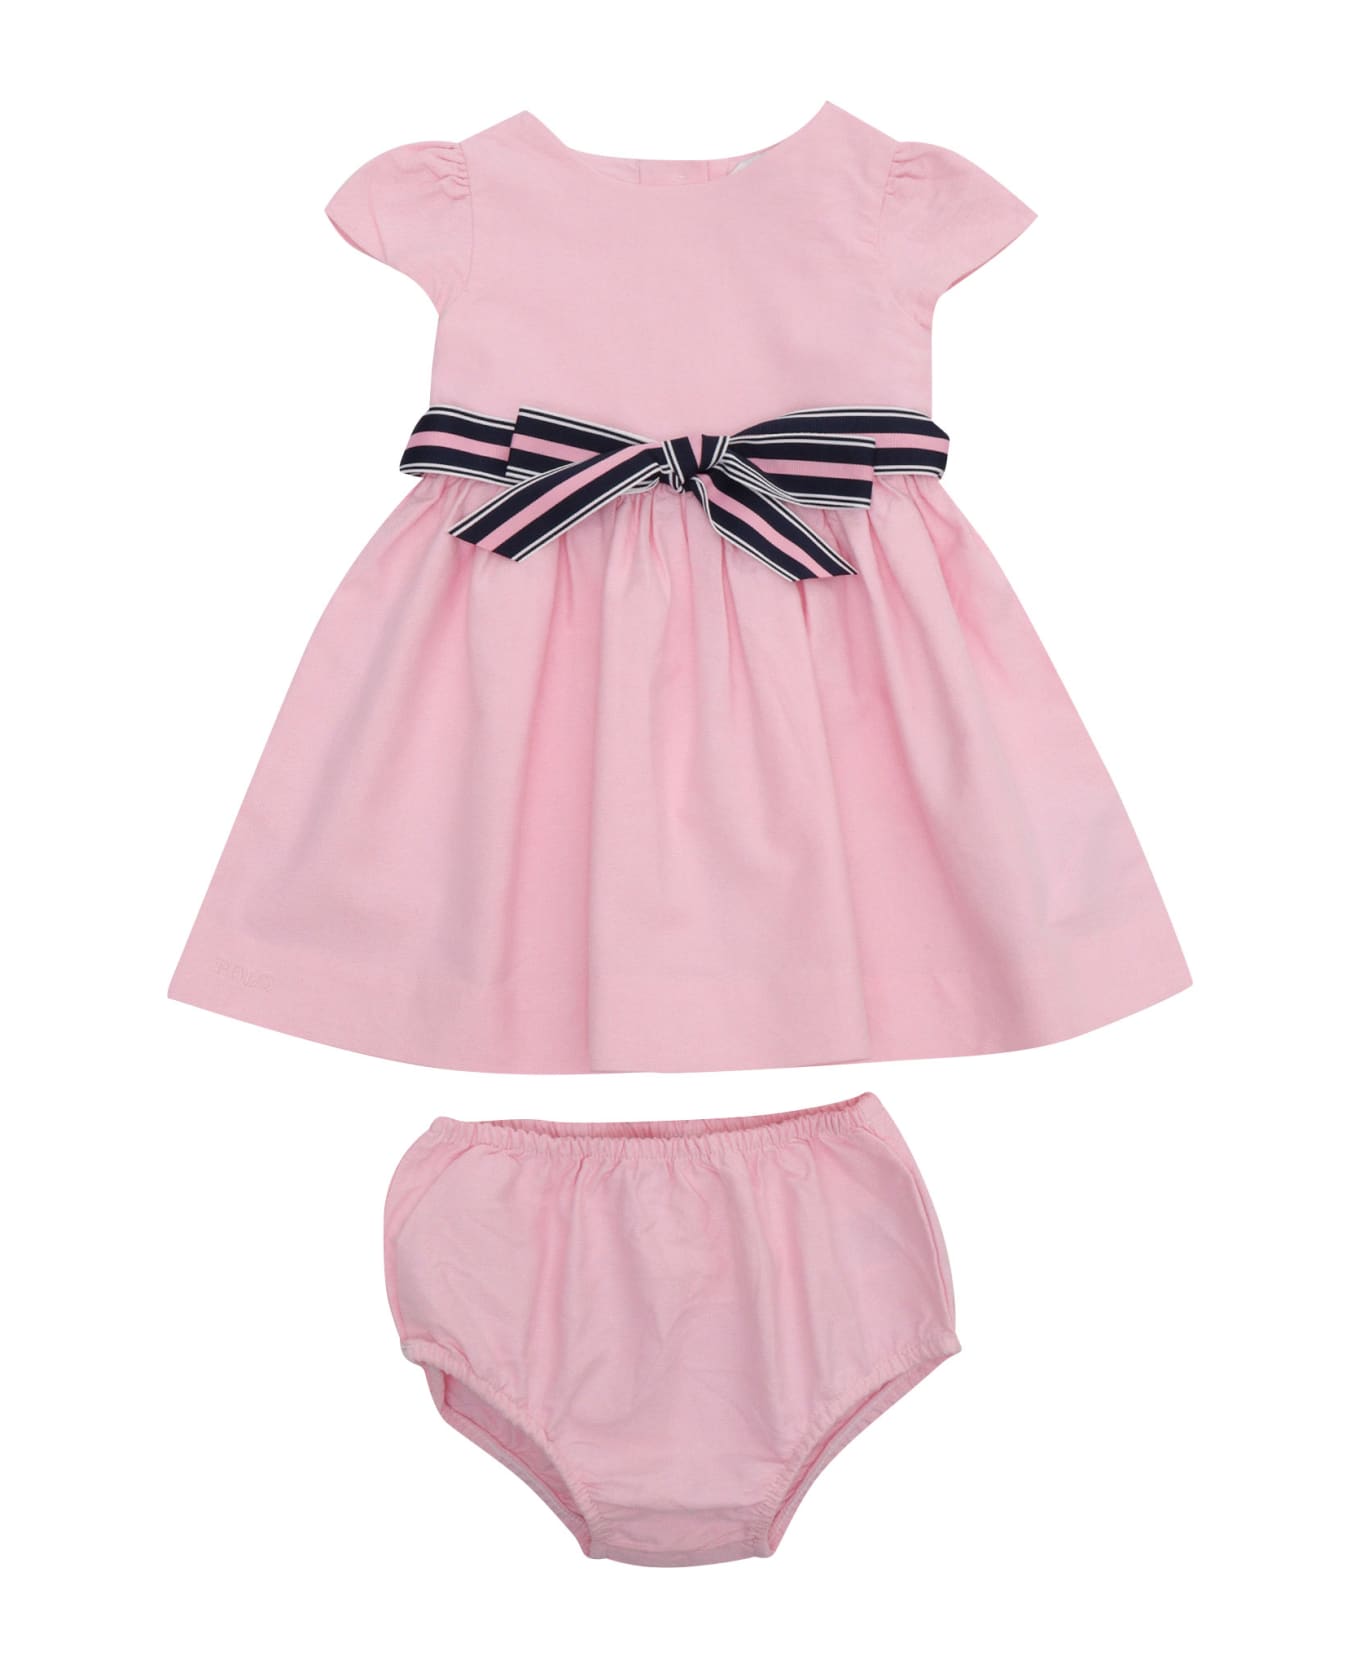 Polo Ralph Lauren Pink Dress With Bow - PINK